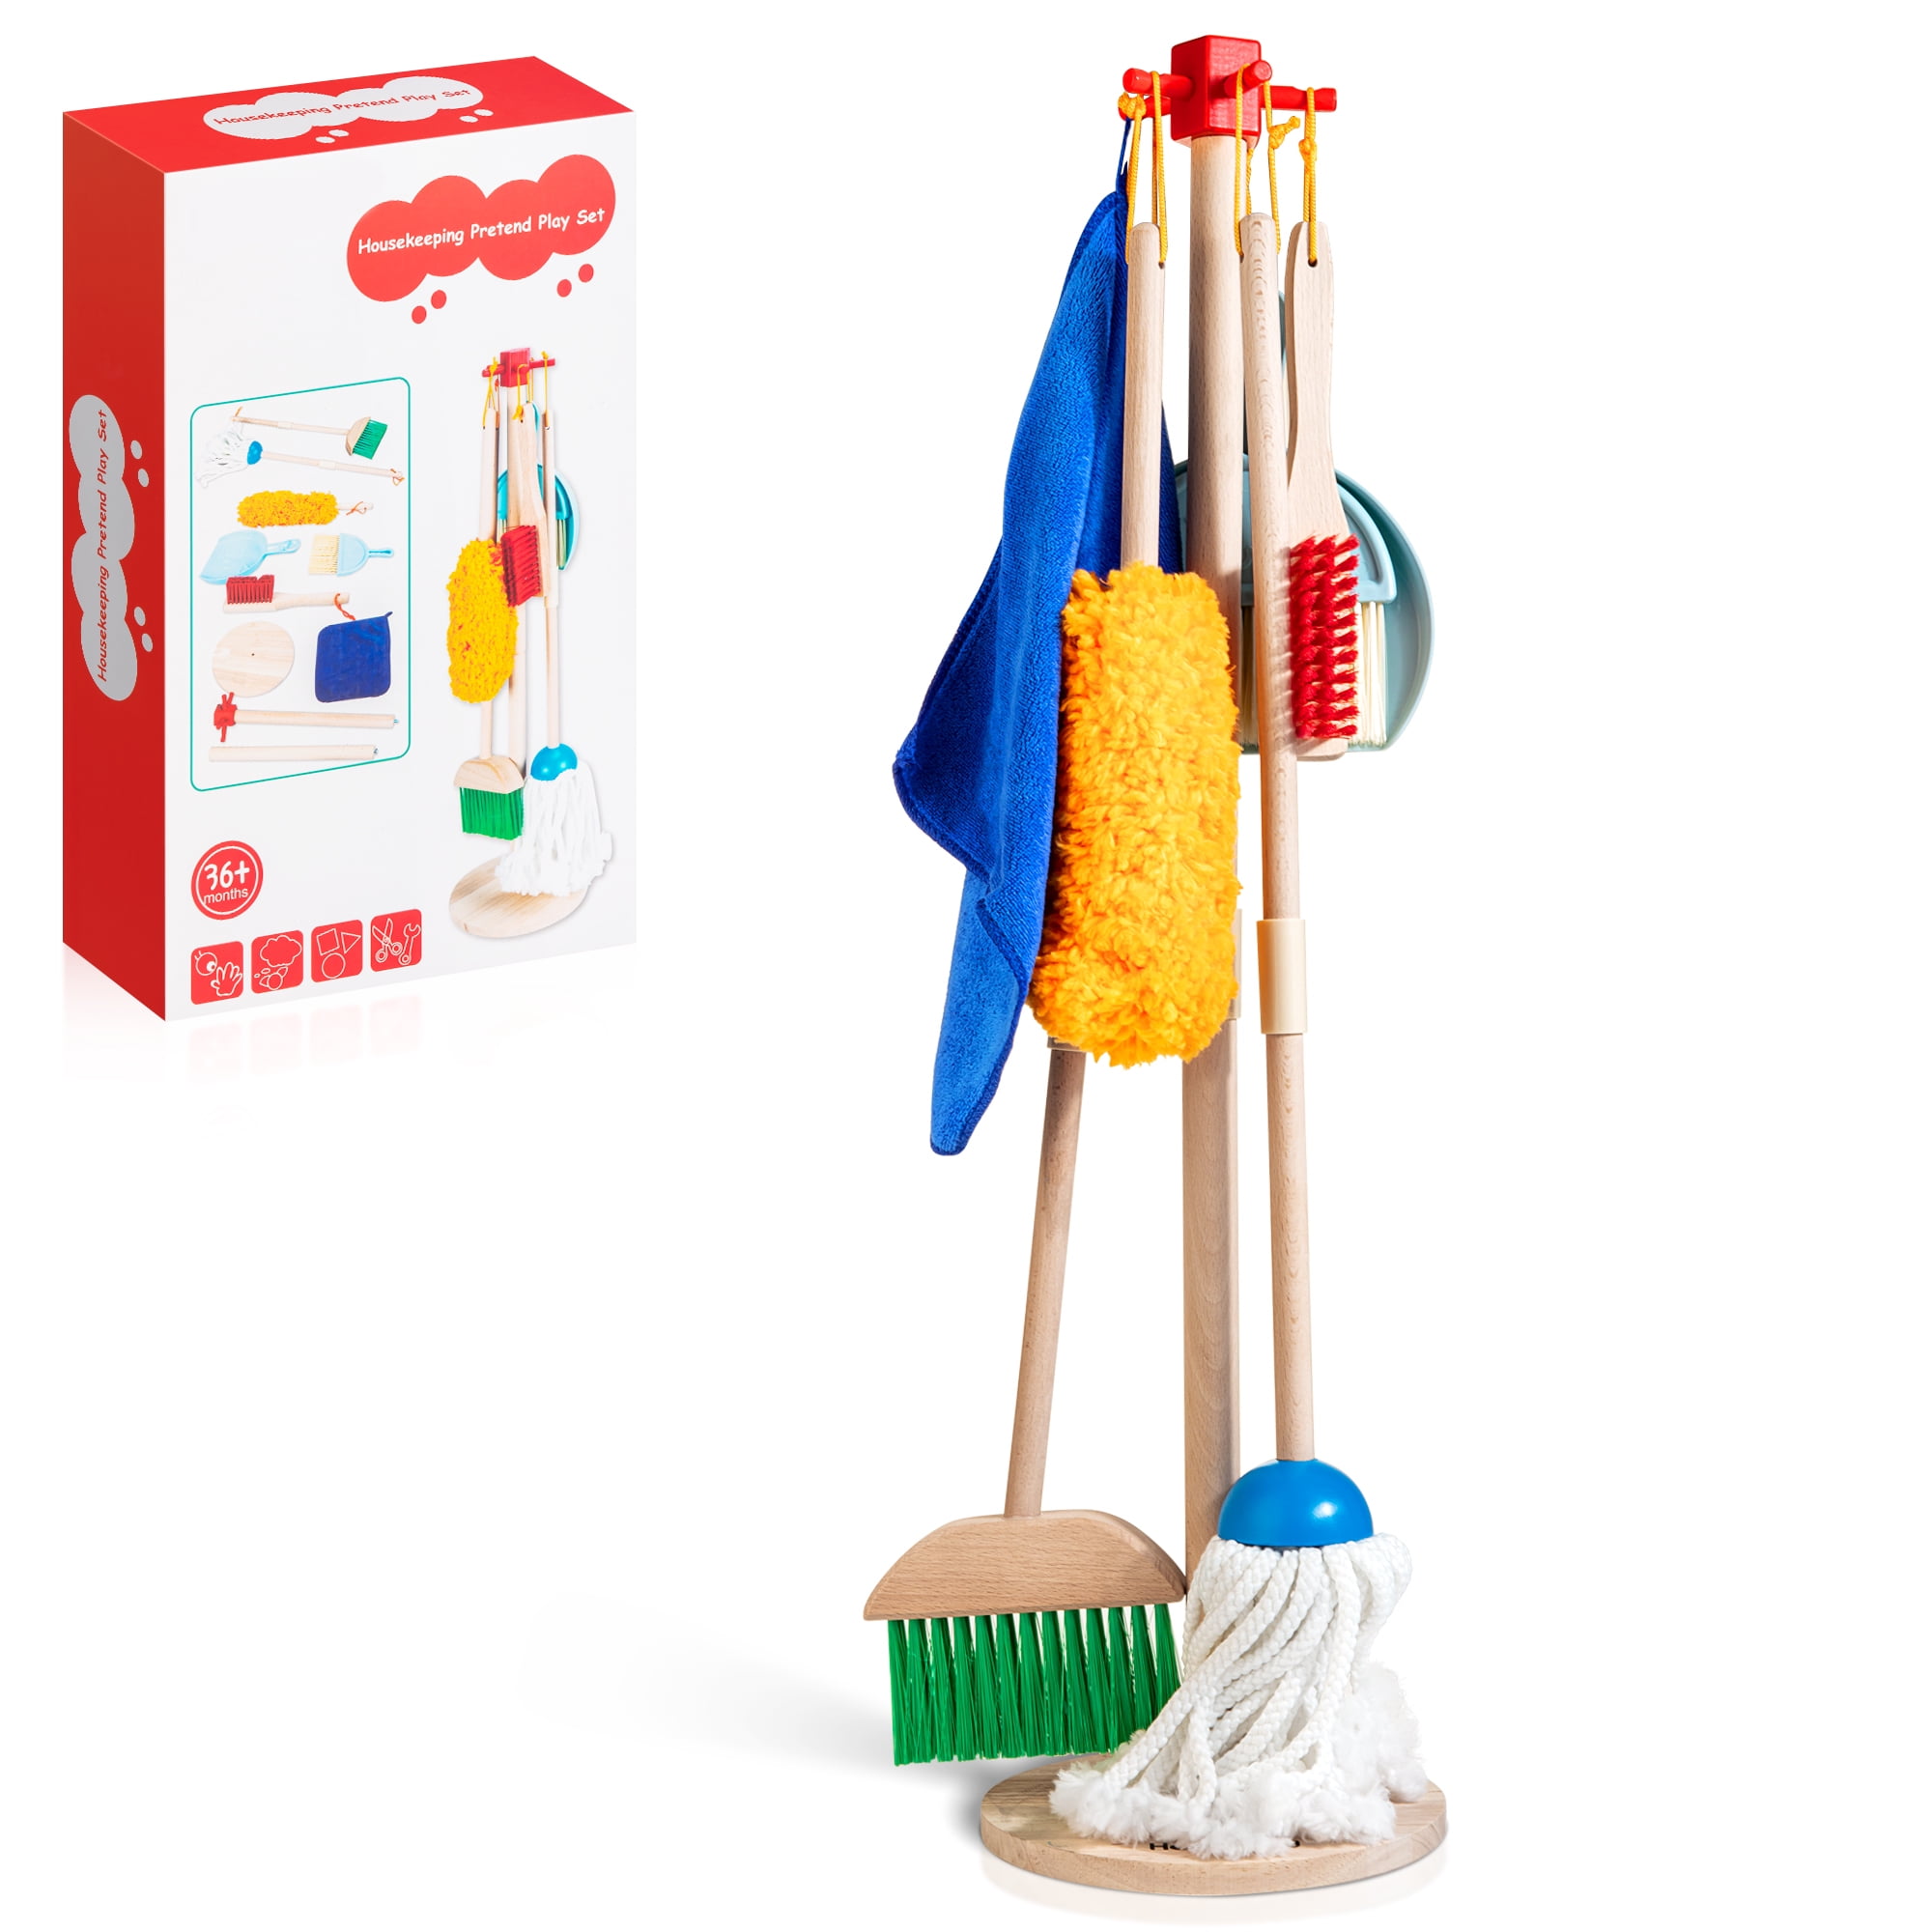 Cleaning Set Toys, Toddler Broom Baby Mop Dustpan Playset, Pretend